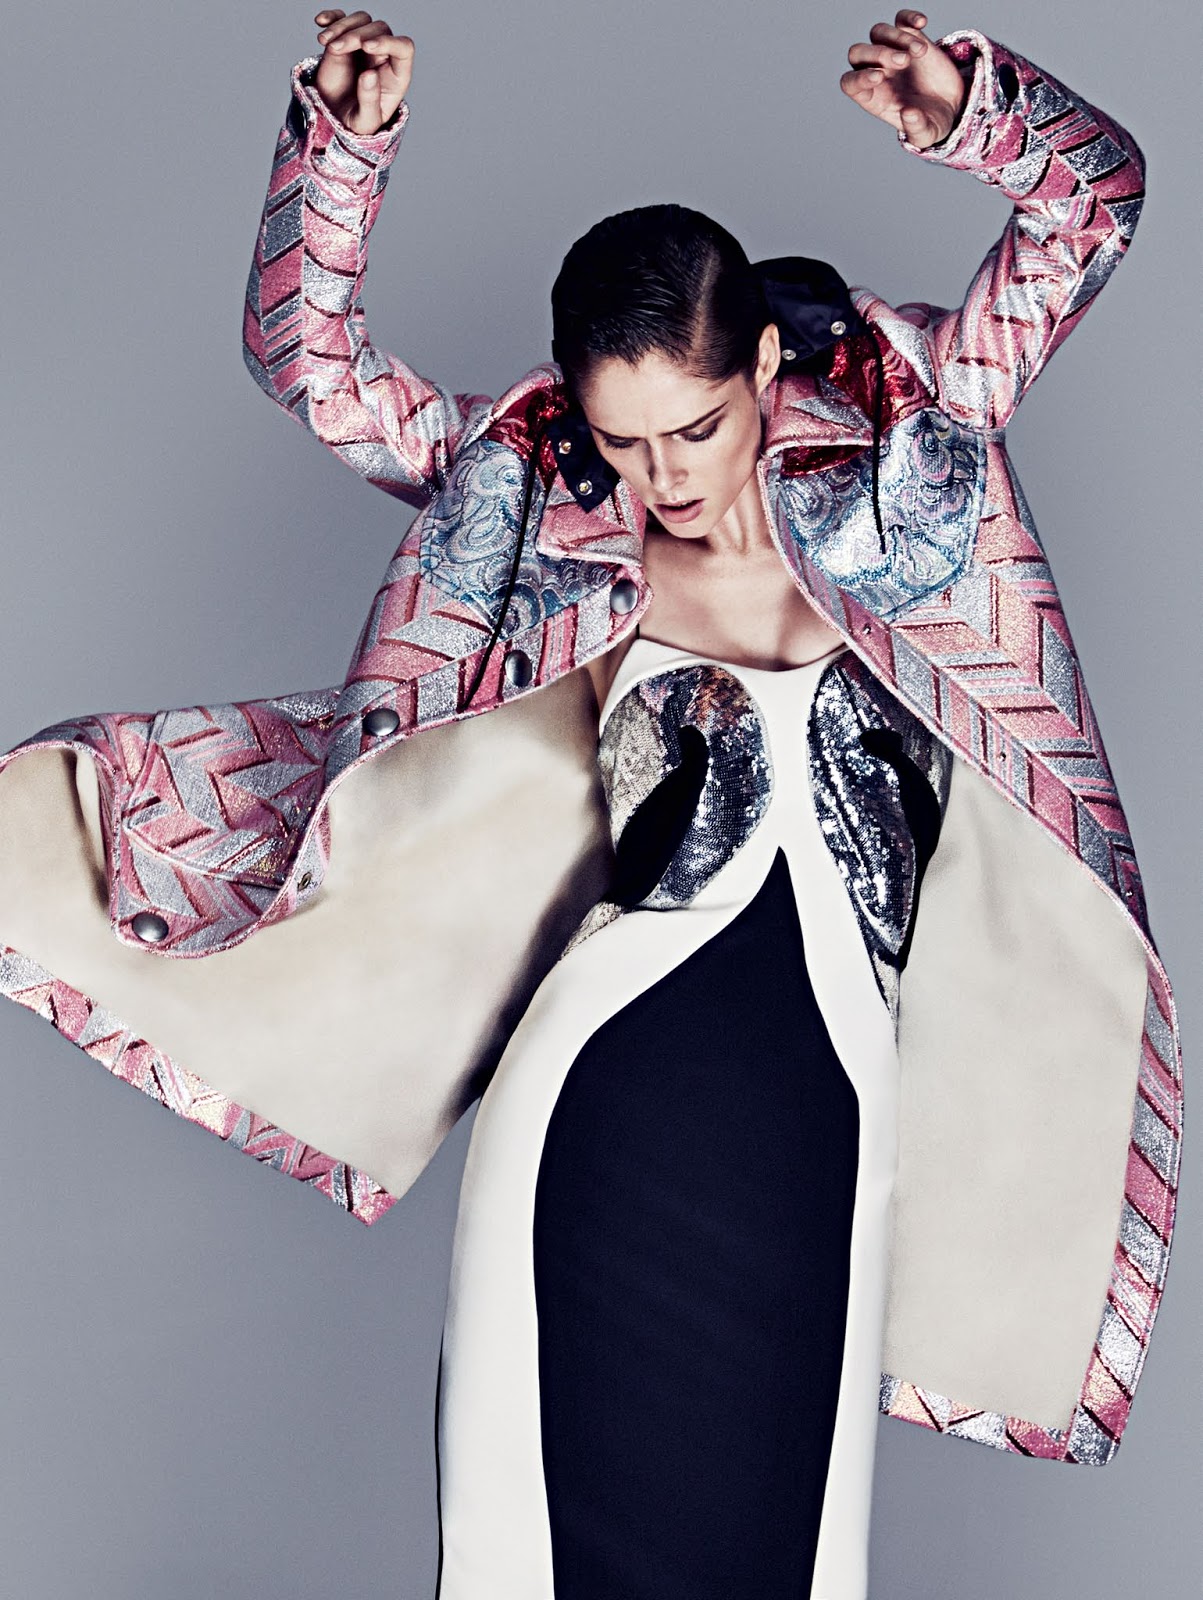 Coco Rocha on What's It's Like to Do 1,000 Poses in 3 Days